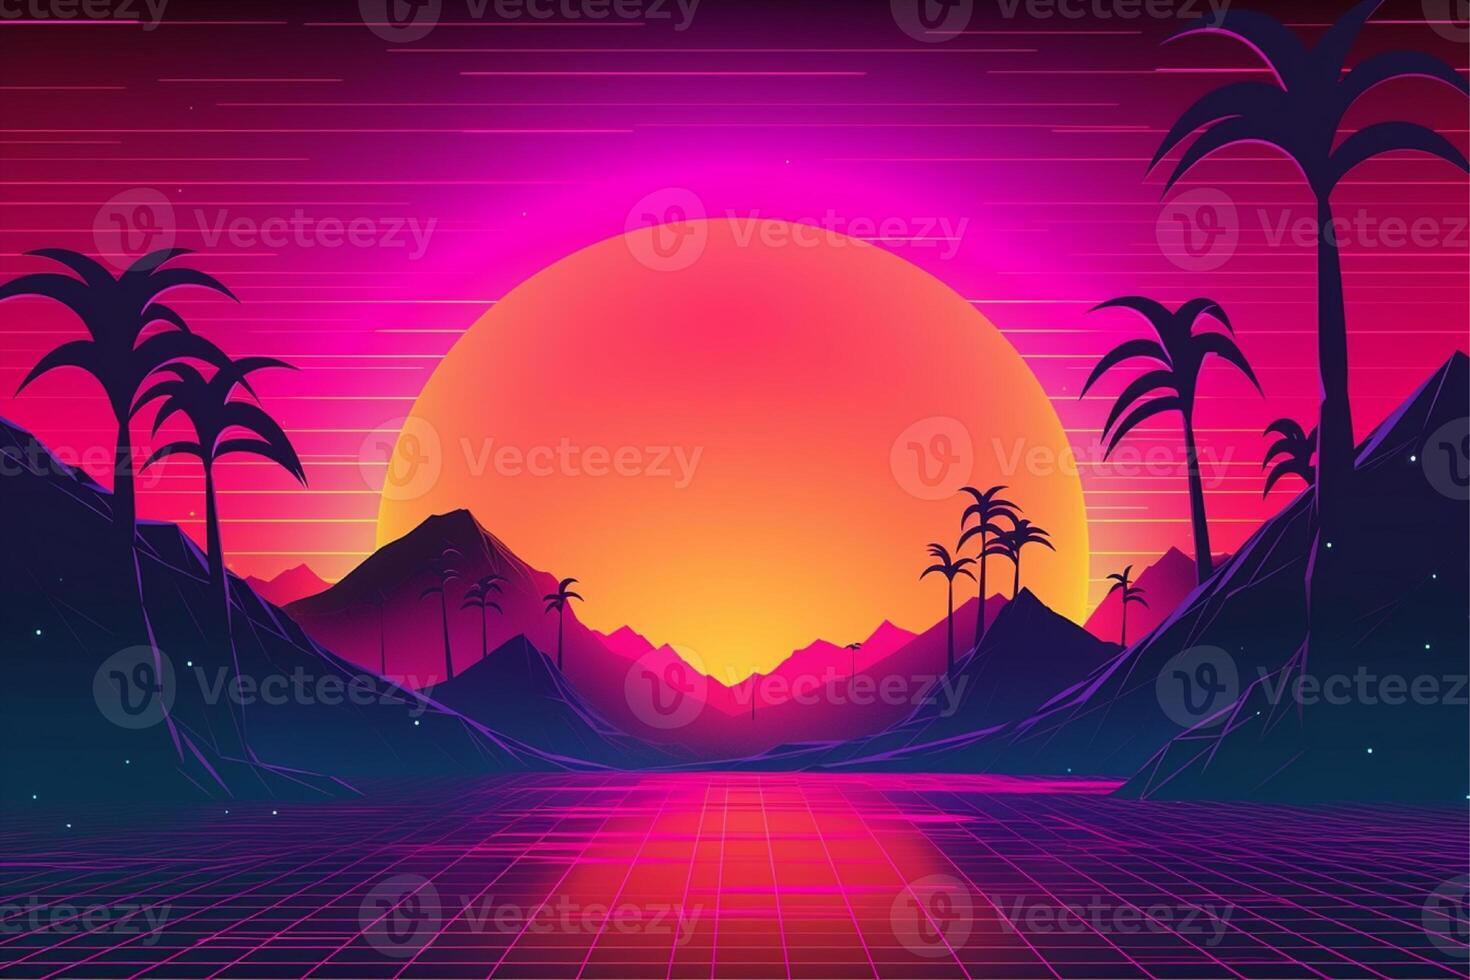 A digital illustration of a sunset with mountains in the background with photo